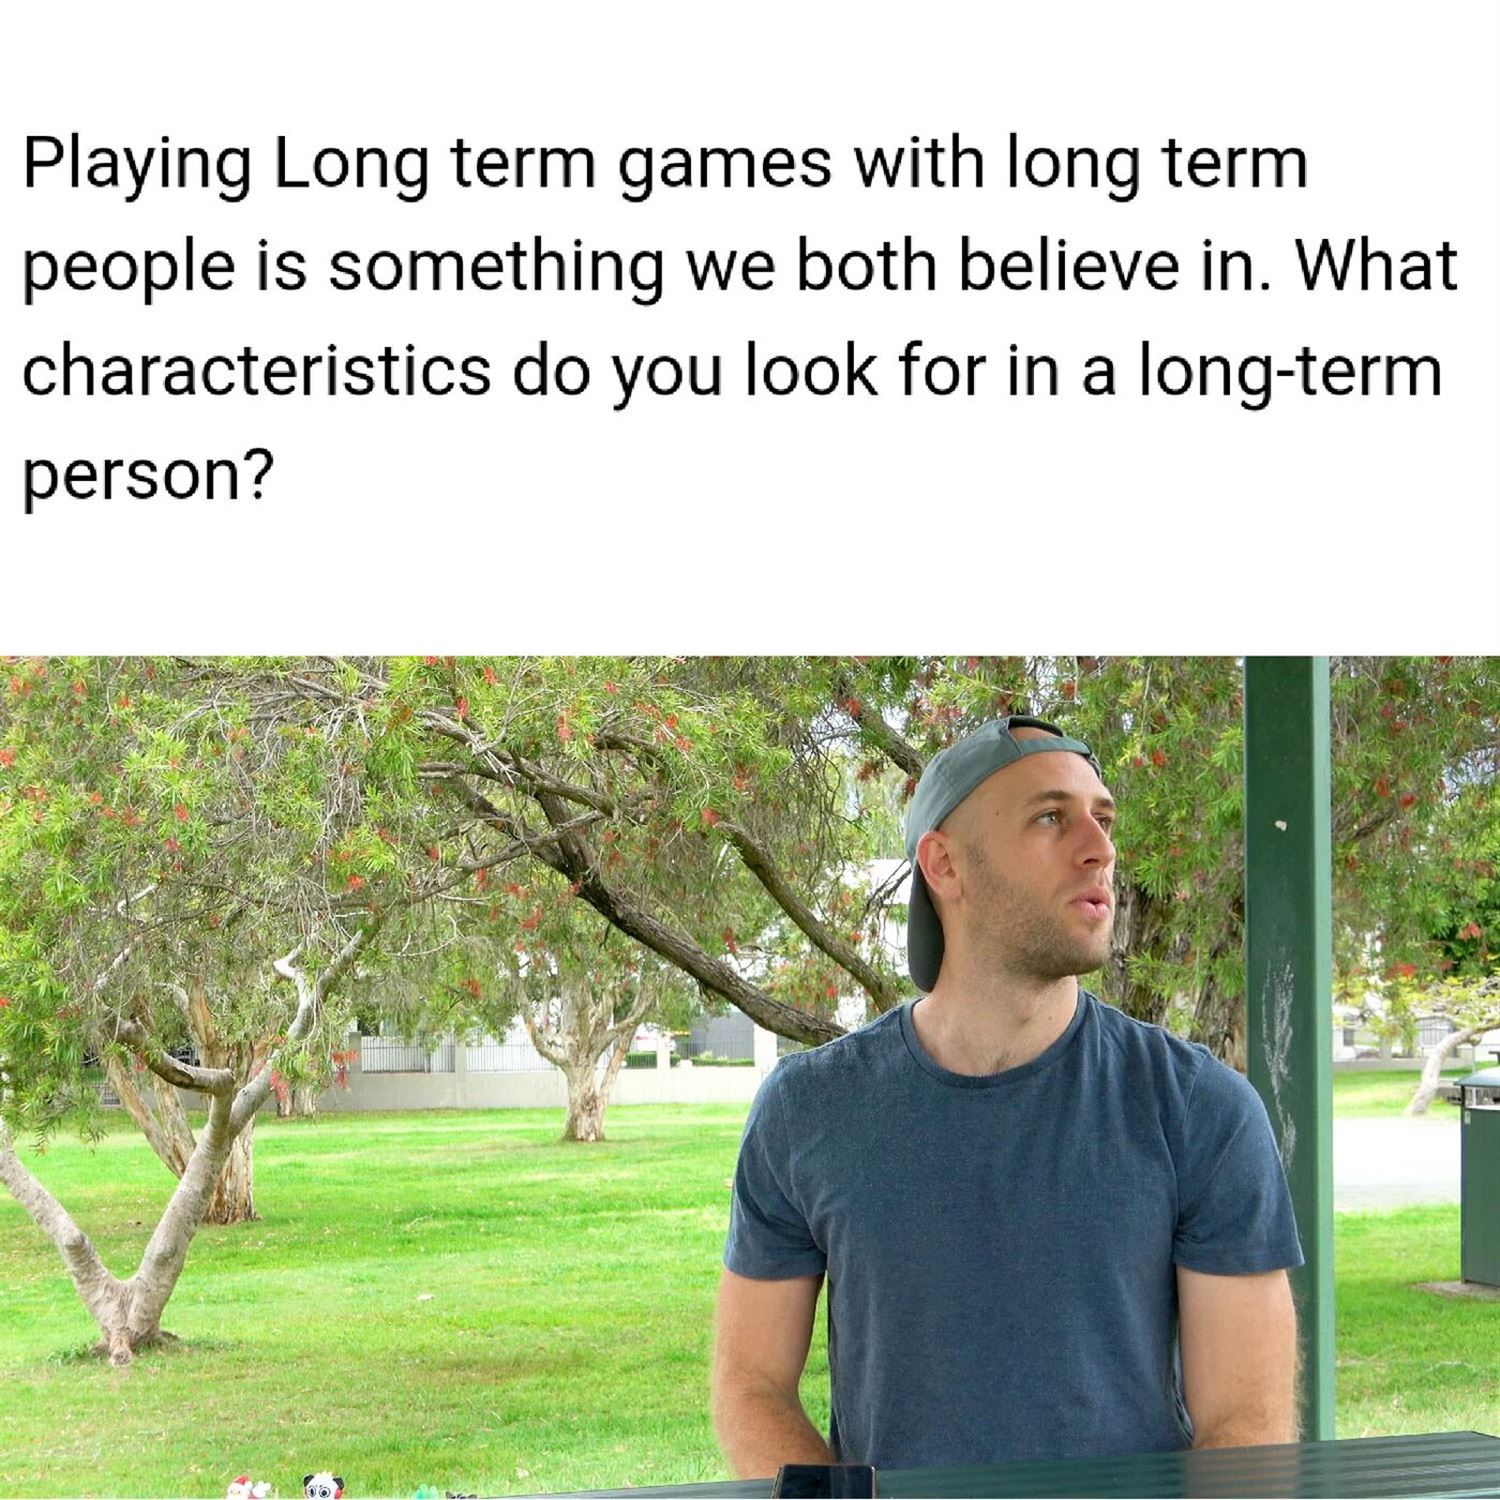 Long term games with long term people